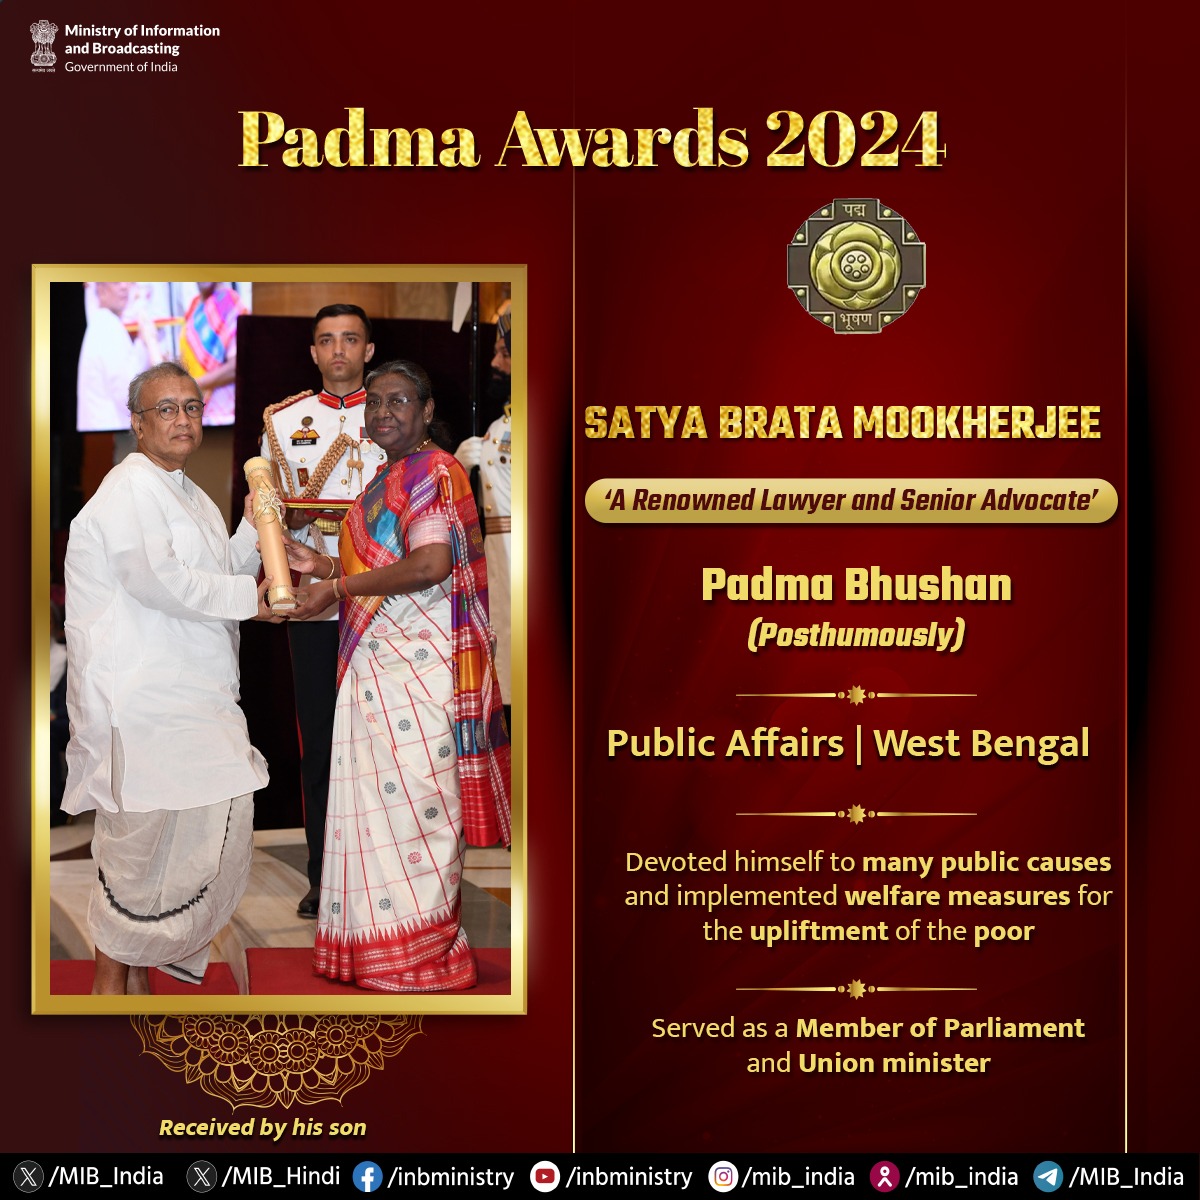 #PadmaAwards2024 - Satya Brata Mookherjee 🏅Padma Bhushan (Posthumously) - Public Affairs 📍West Bengal 🔹A renowned lawyer and senior advocate 🔹Devoted himself to many public causes and implemented welfare measures for the upliftment of the poor